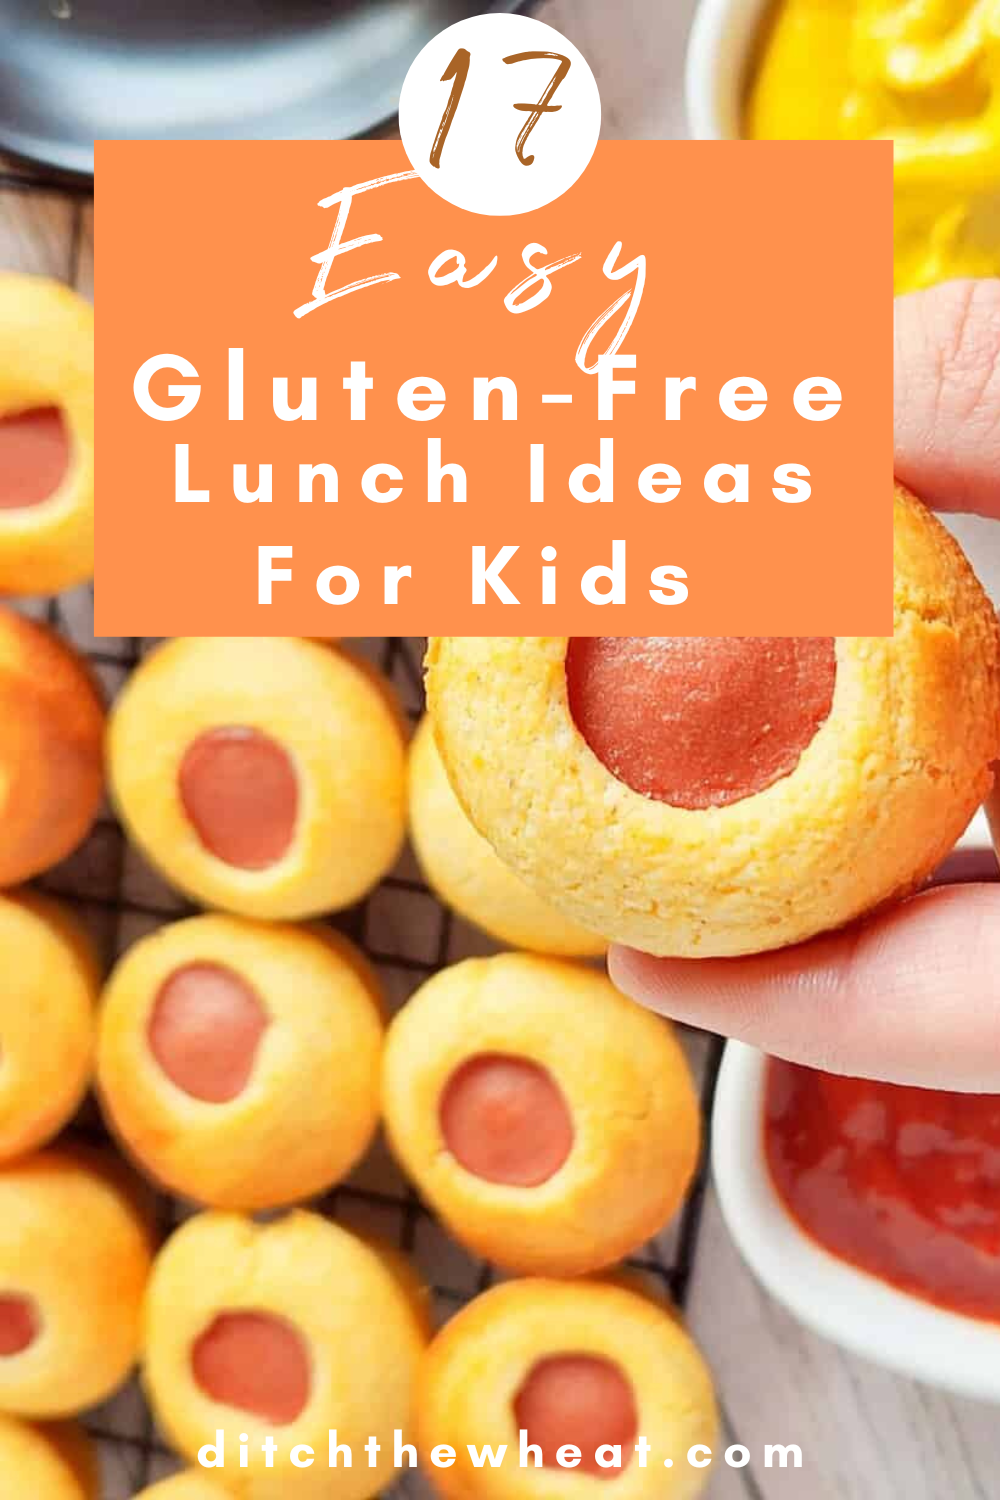 An image of gluten free corn dog muffins for a post about gluten free lunch ideas for kids.